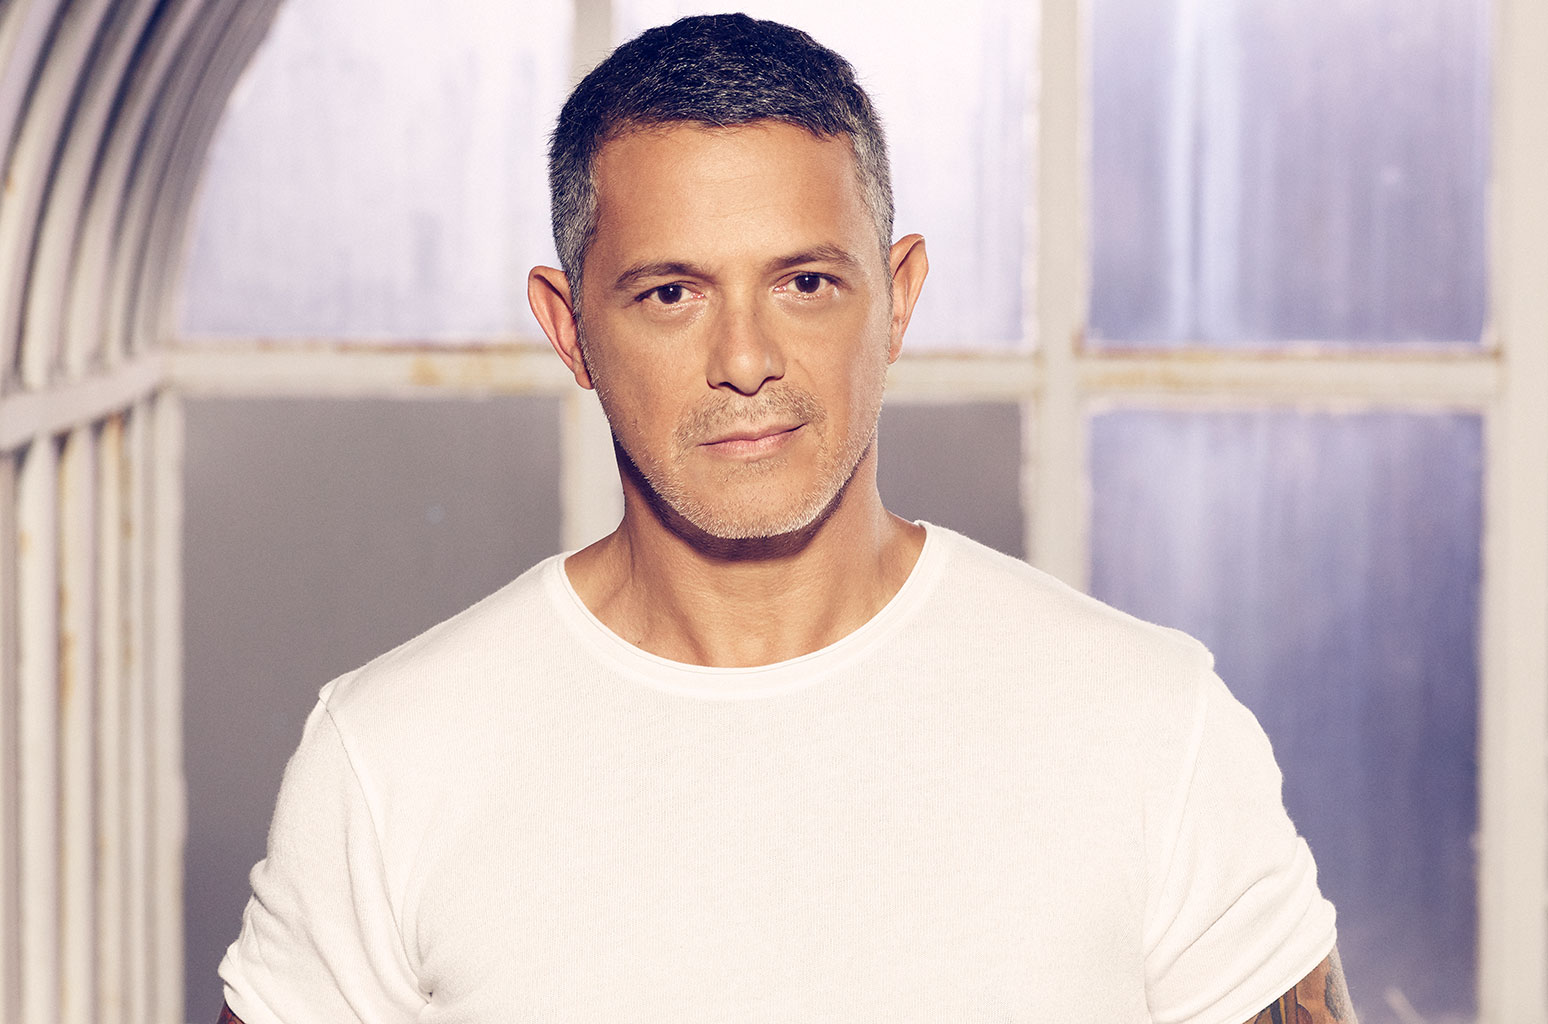 Celebrate Alejandro Sanz's Birthday By Jamming to His Hot Latin Songs No. 1 Hits - www.billboard.com - Spain